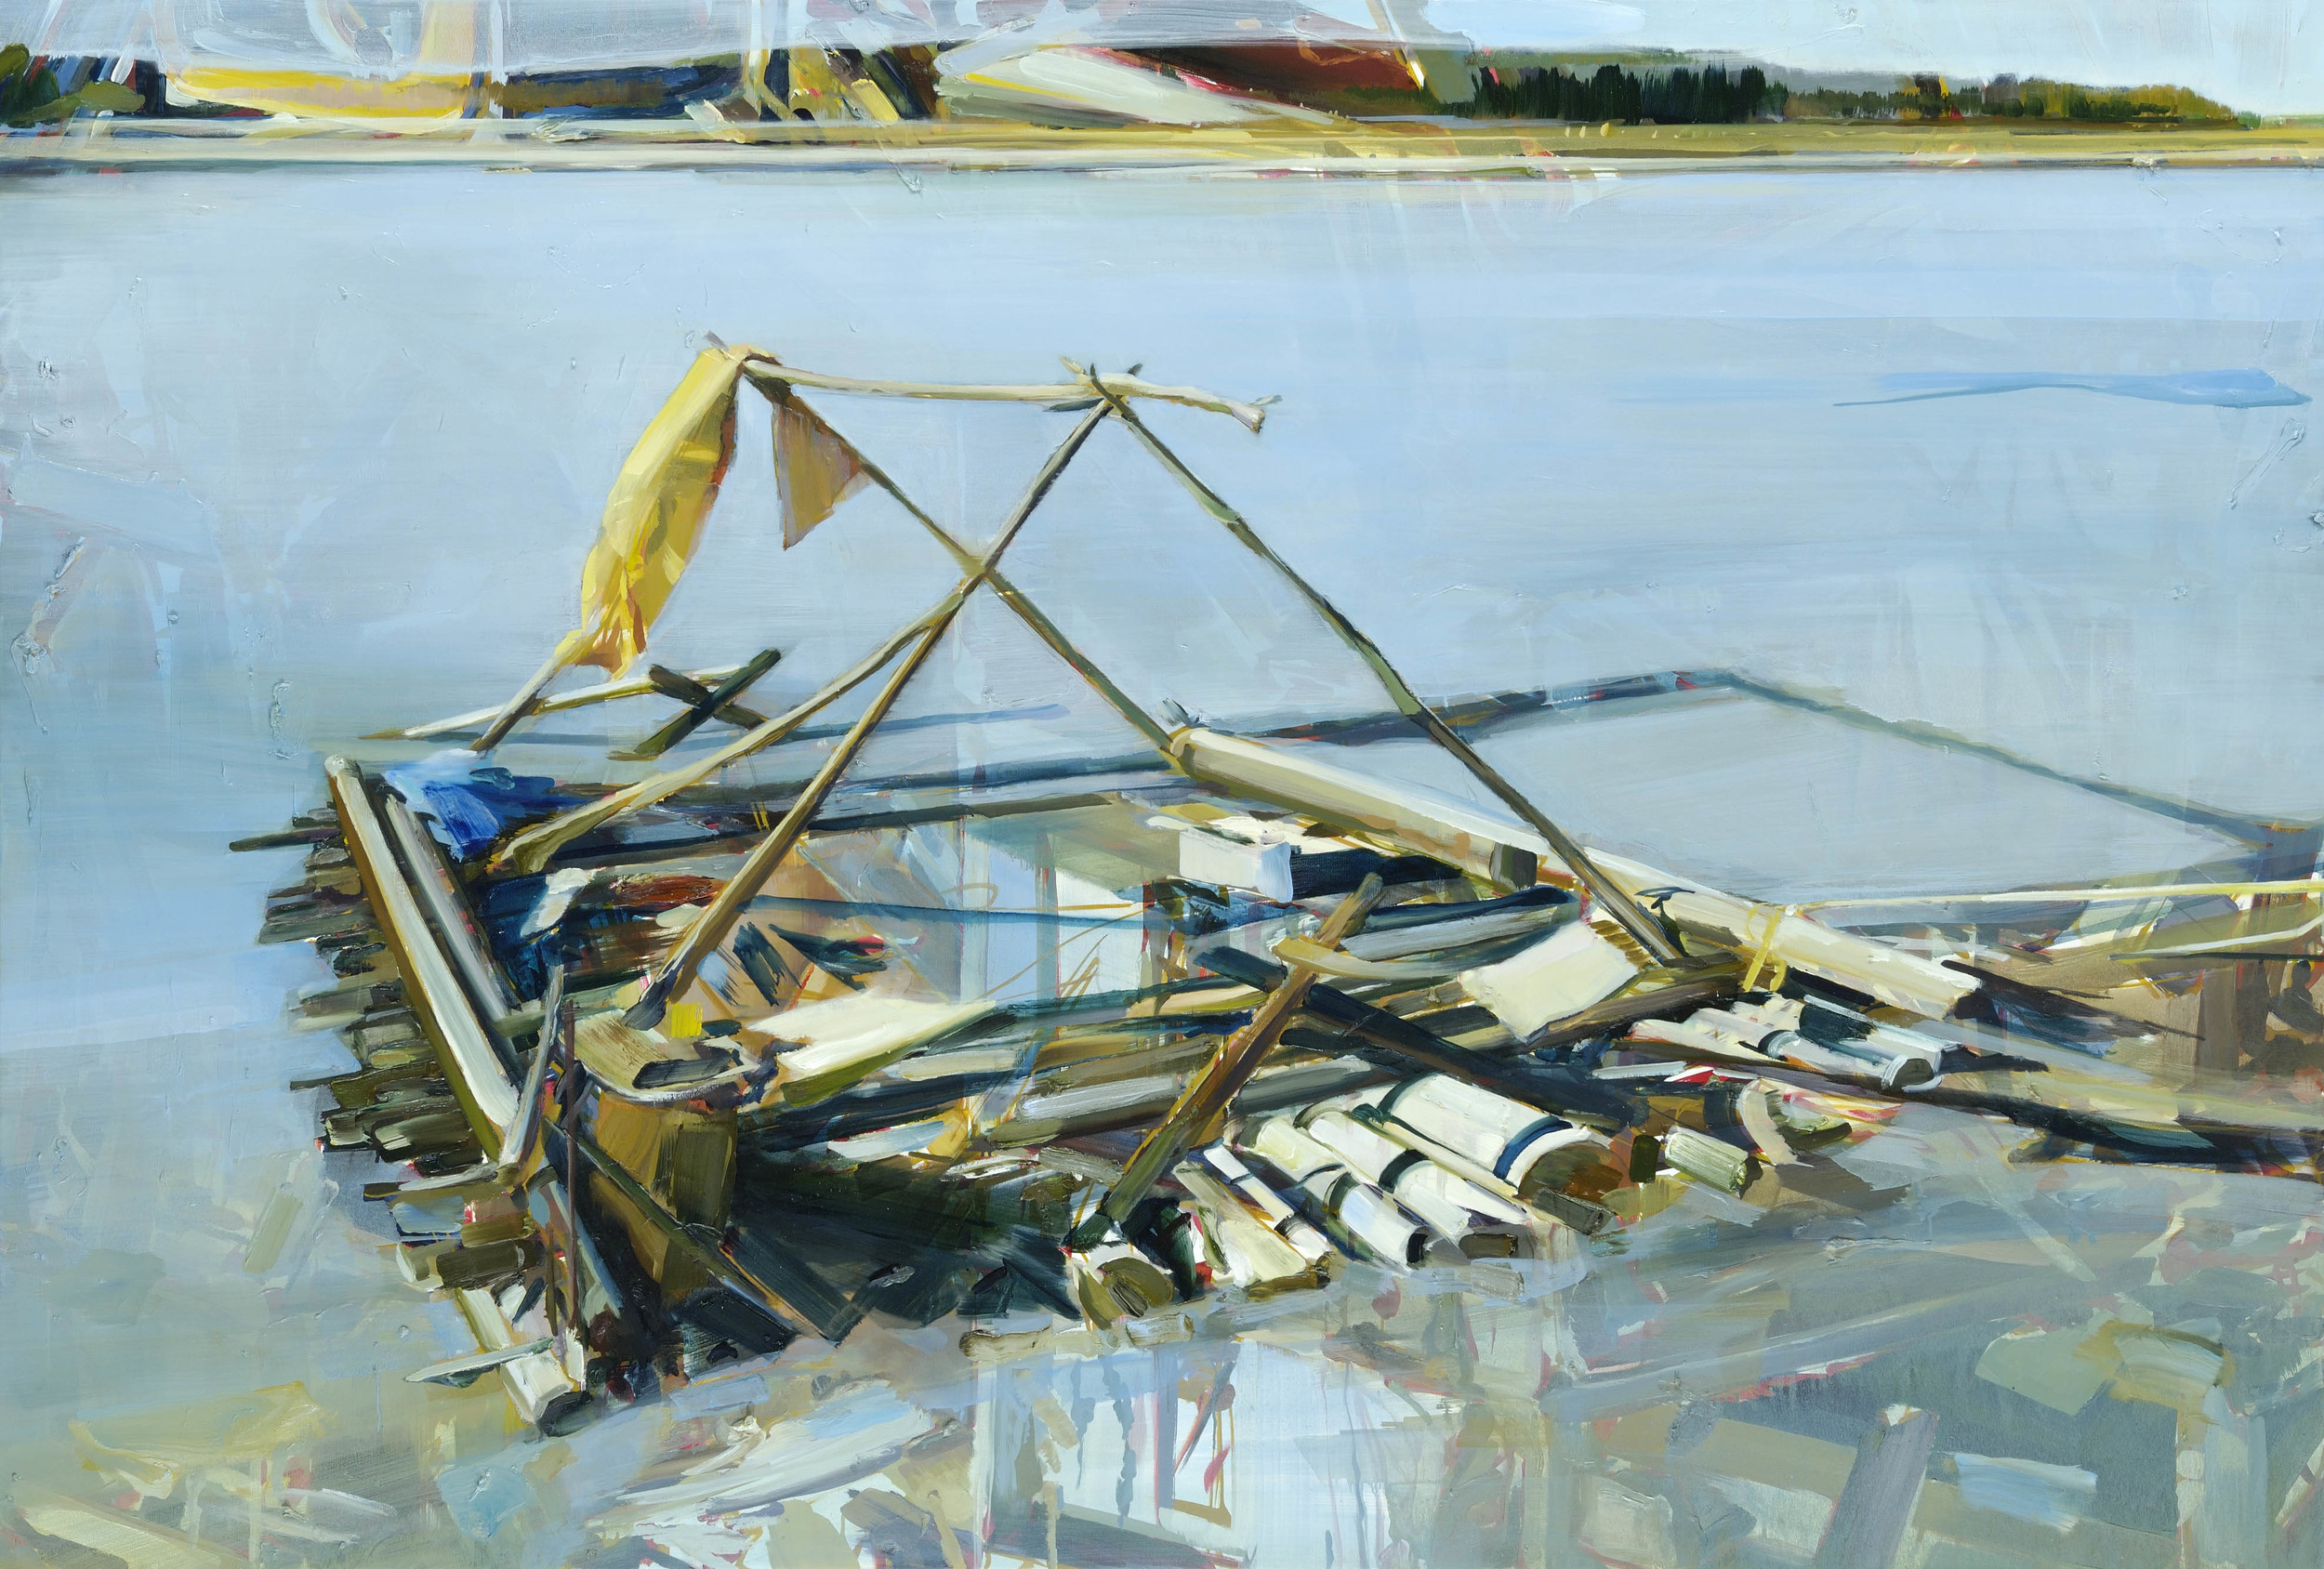   Untitled (Mobile Home) , 2010, oil on canvas, 136 x 200cm. Salomon Foundation Collection, France 